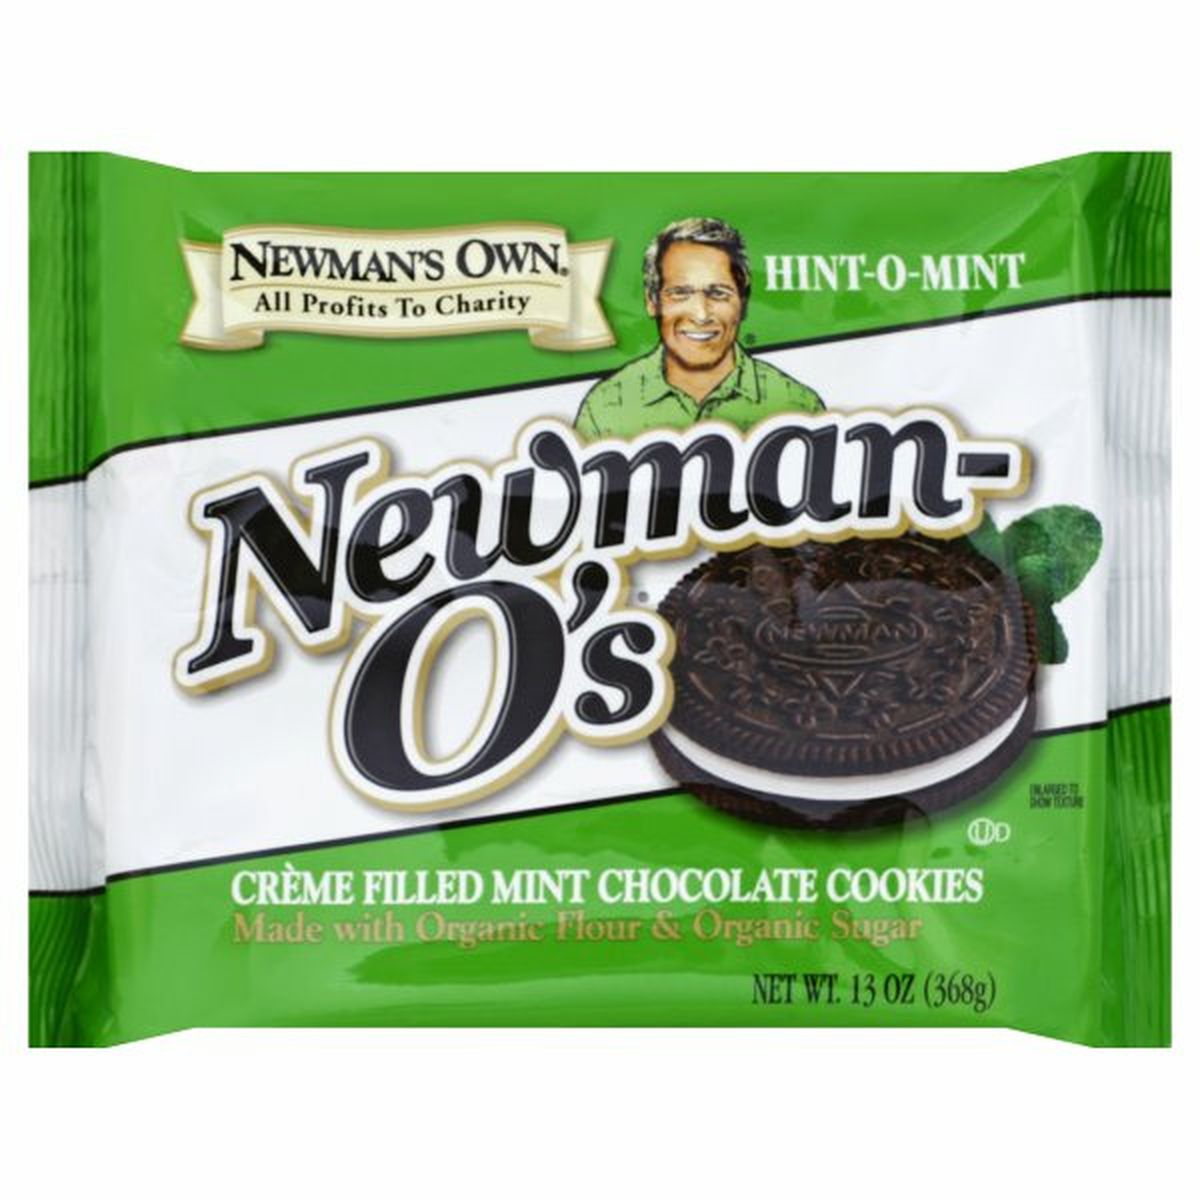 Calories in Newman's Own Newman-O's Cookies, Hint-O-Mint